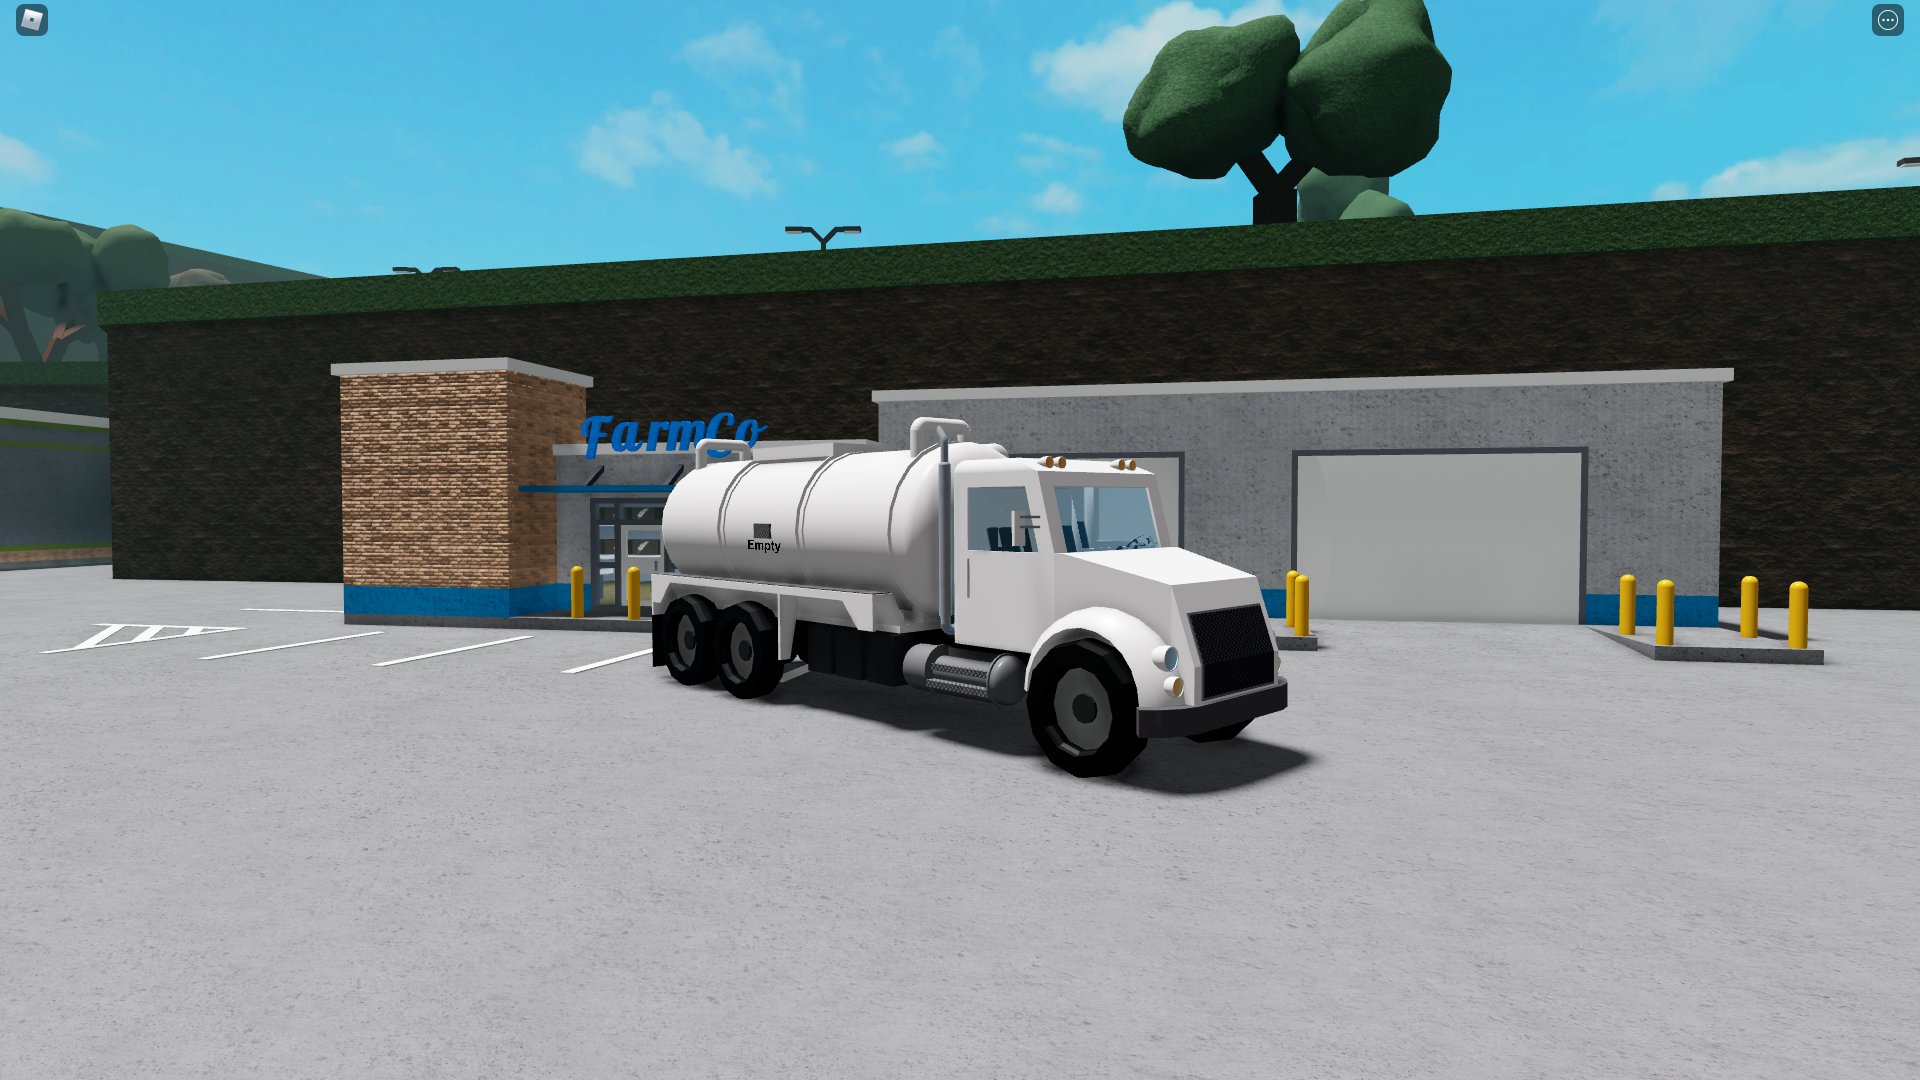 Dunn Games On Twitter Sell Milk With Style In Farming And Friend S Upcoming Update Stay Tuned Play Here Https T Co Ta62uv8qhc Roblox Robloxdev Https T Co Or5ybbeyx7 - roblox farming and friends codes